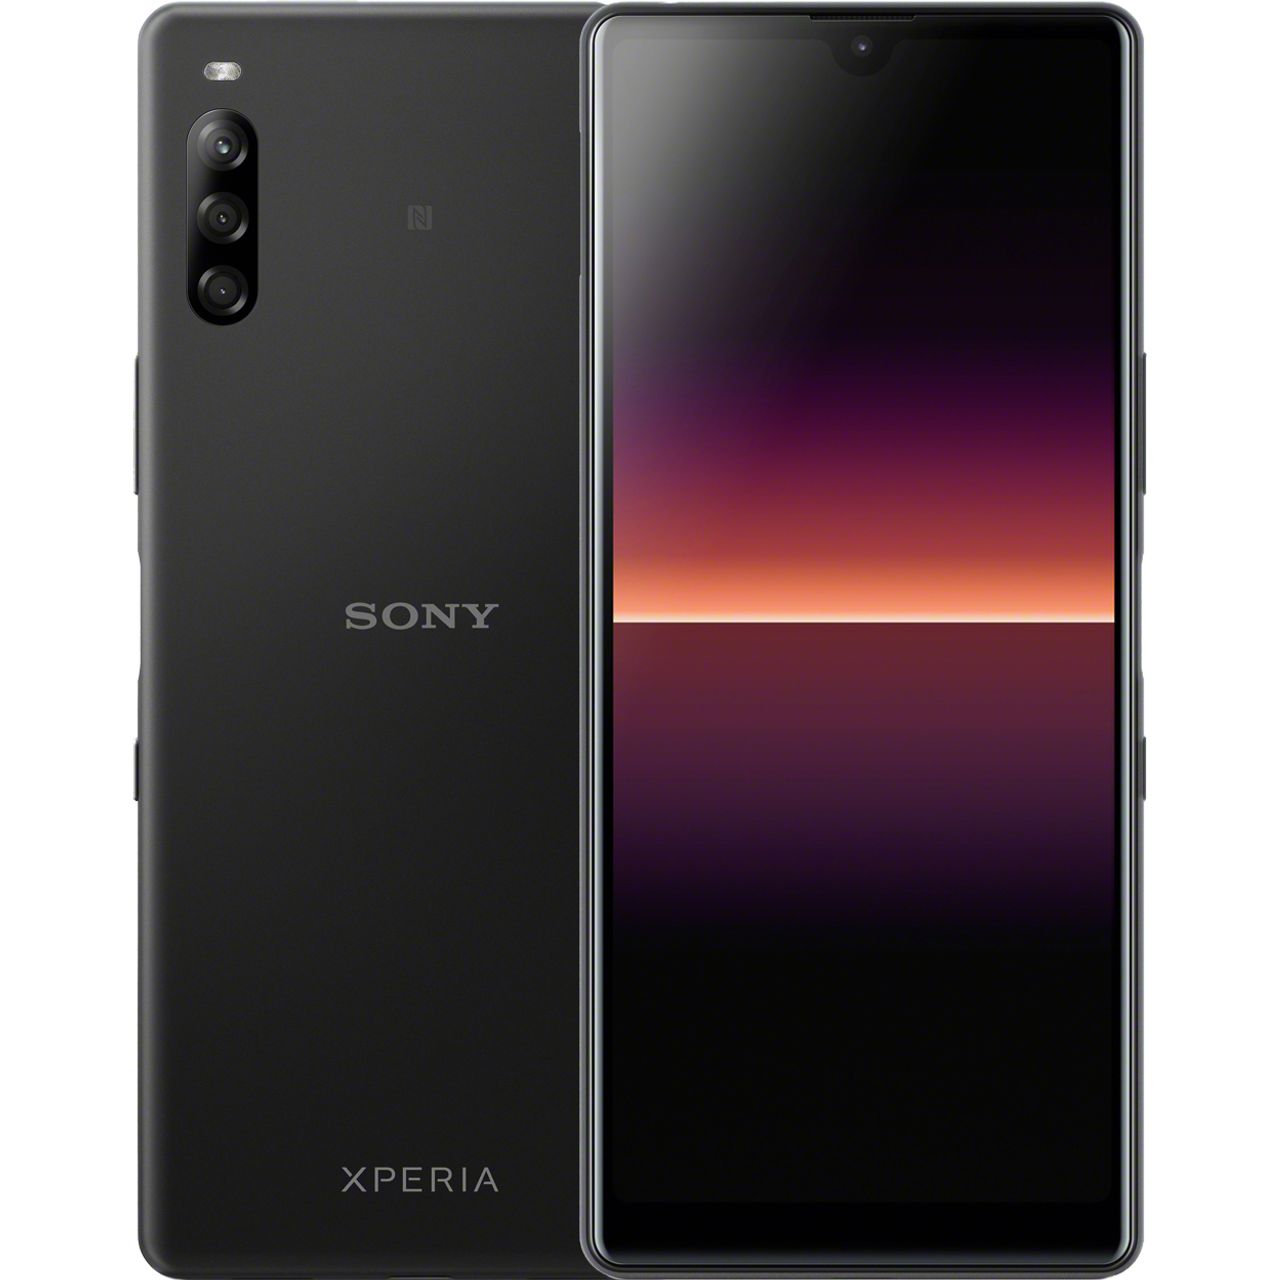 Sony Xperia L4 Smartphone in Black Review